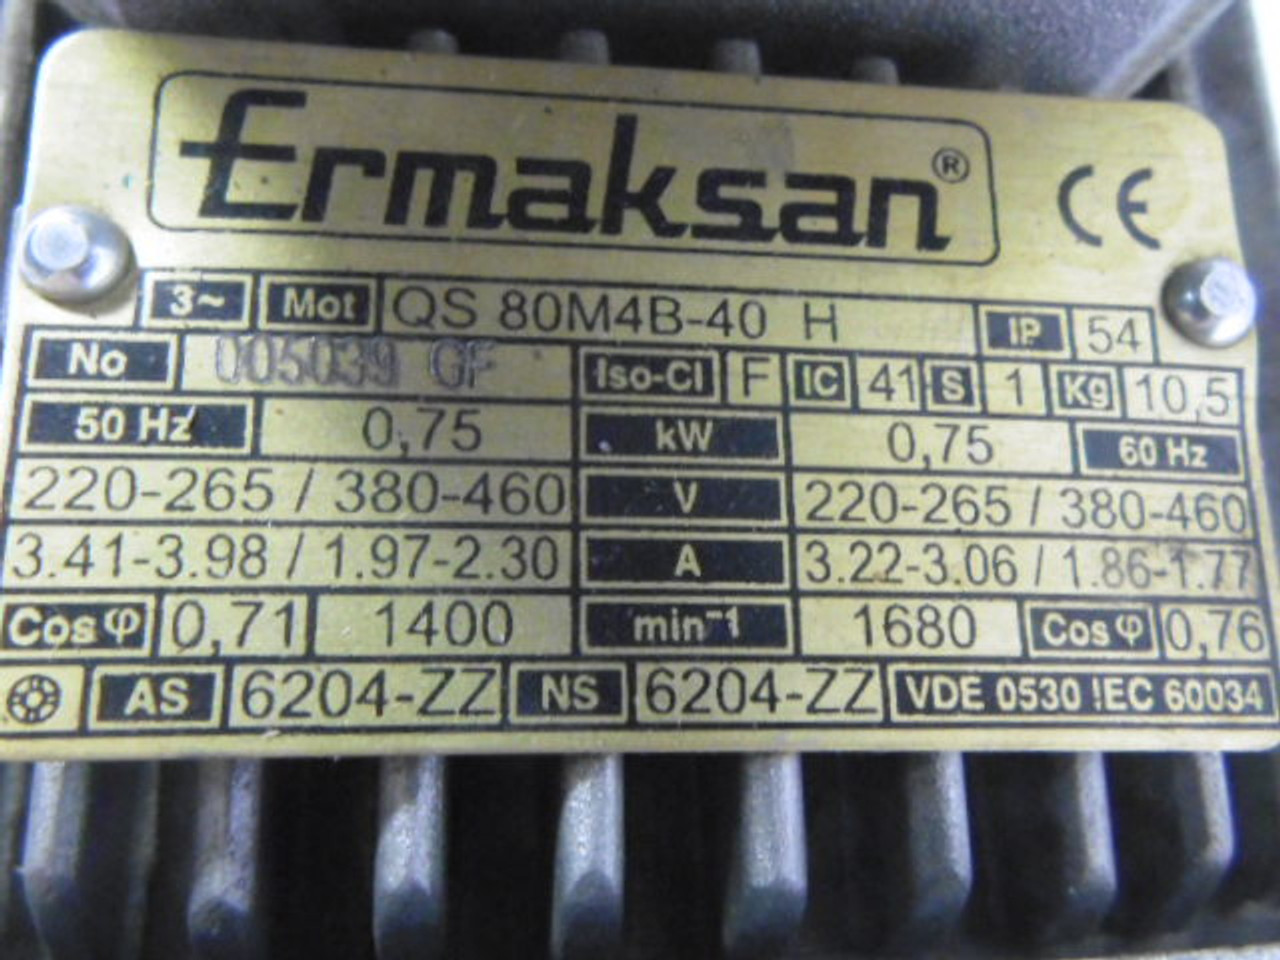 Ermaksan 0.75kW 1680RPM 220-265/380-460V TEFC 3Ph 3.22-3.06A 60Hz USED